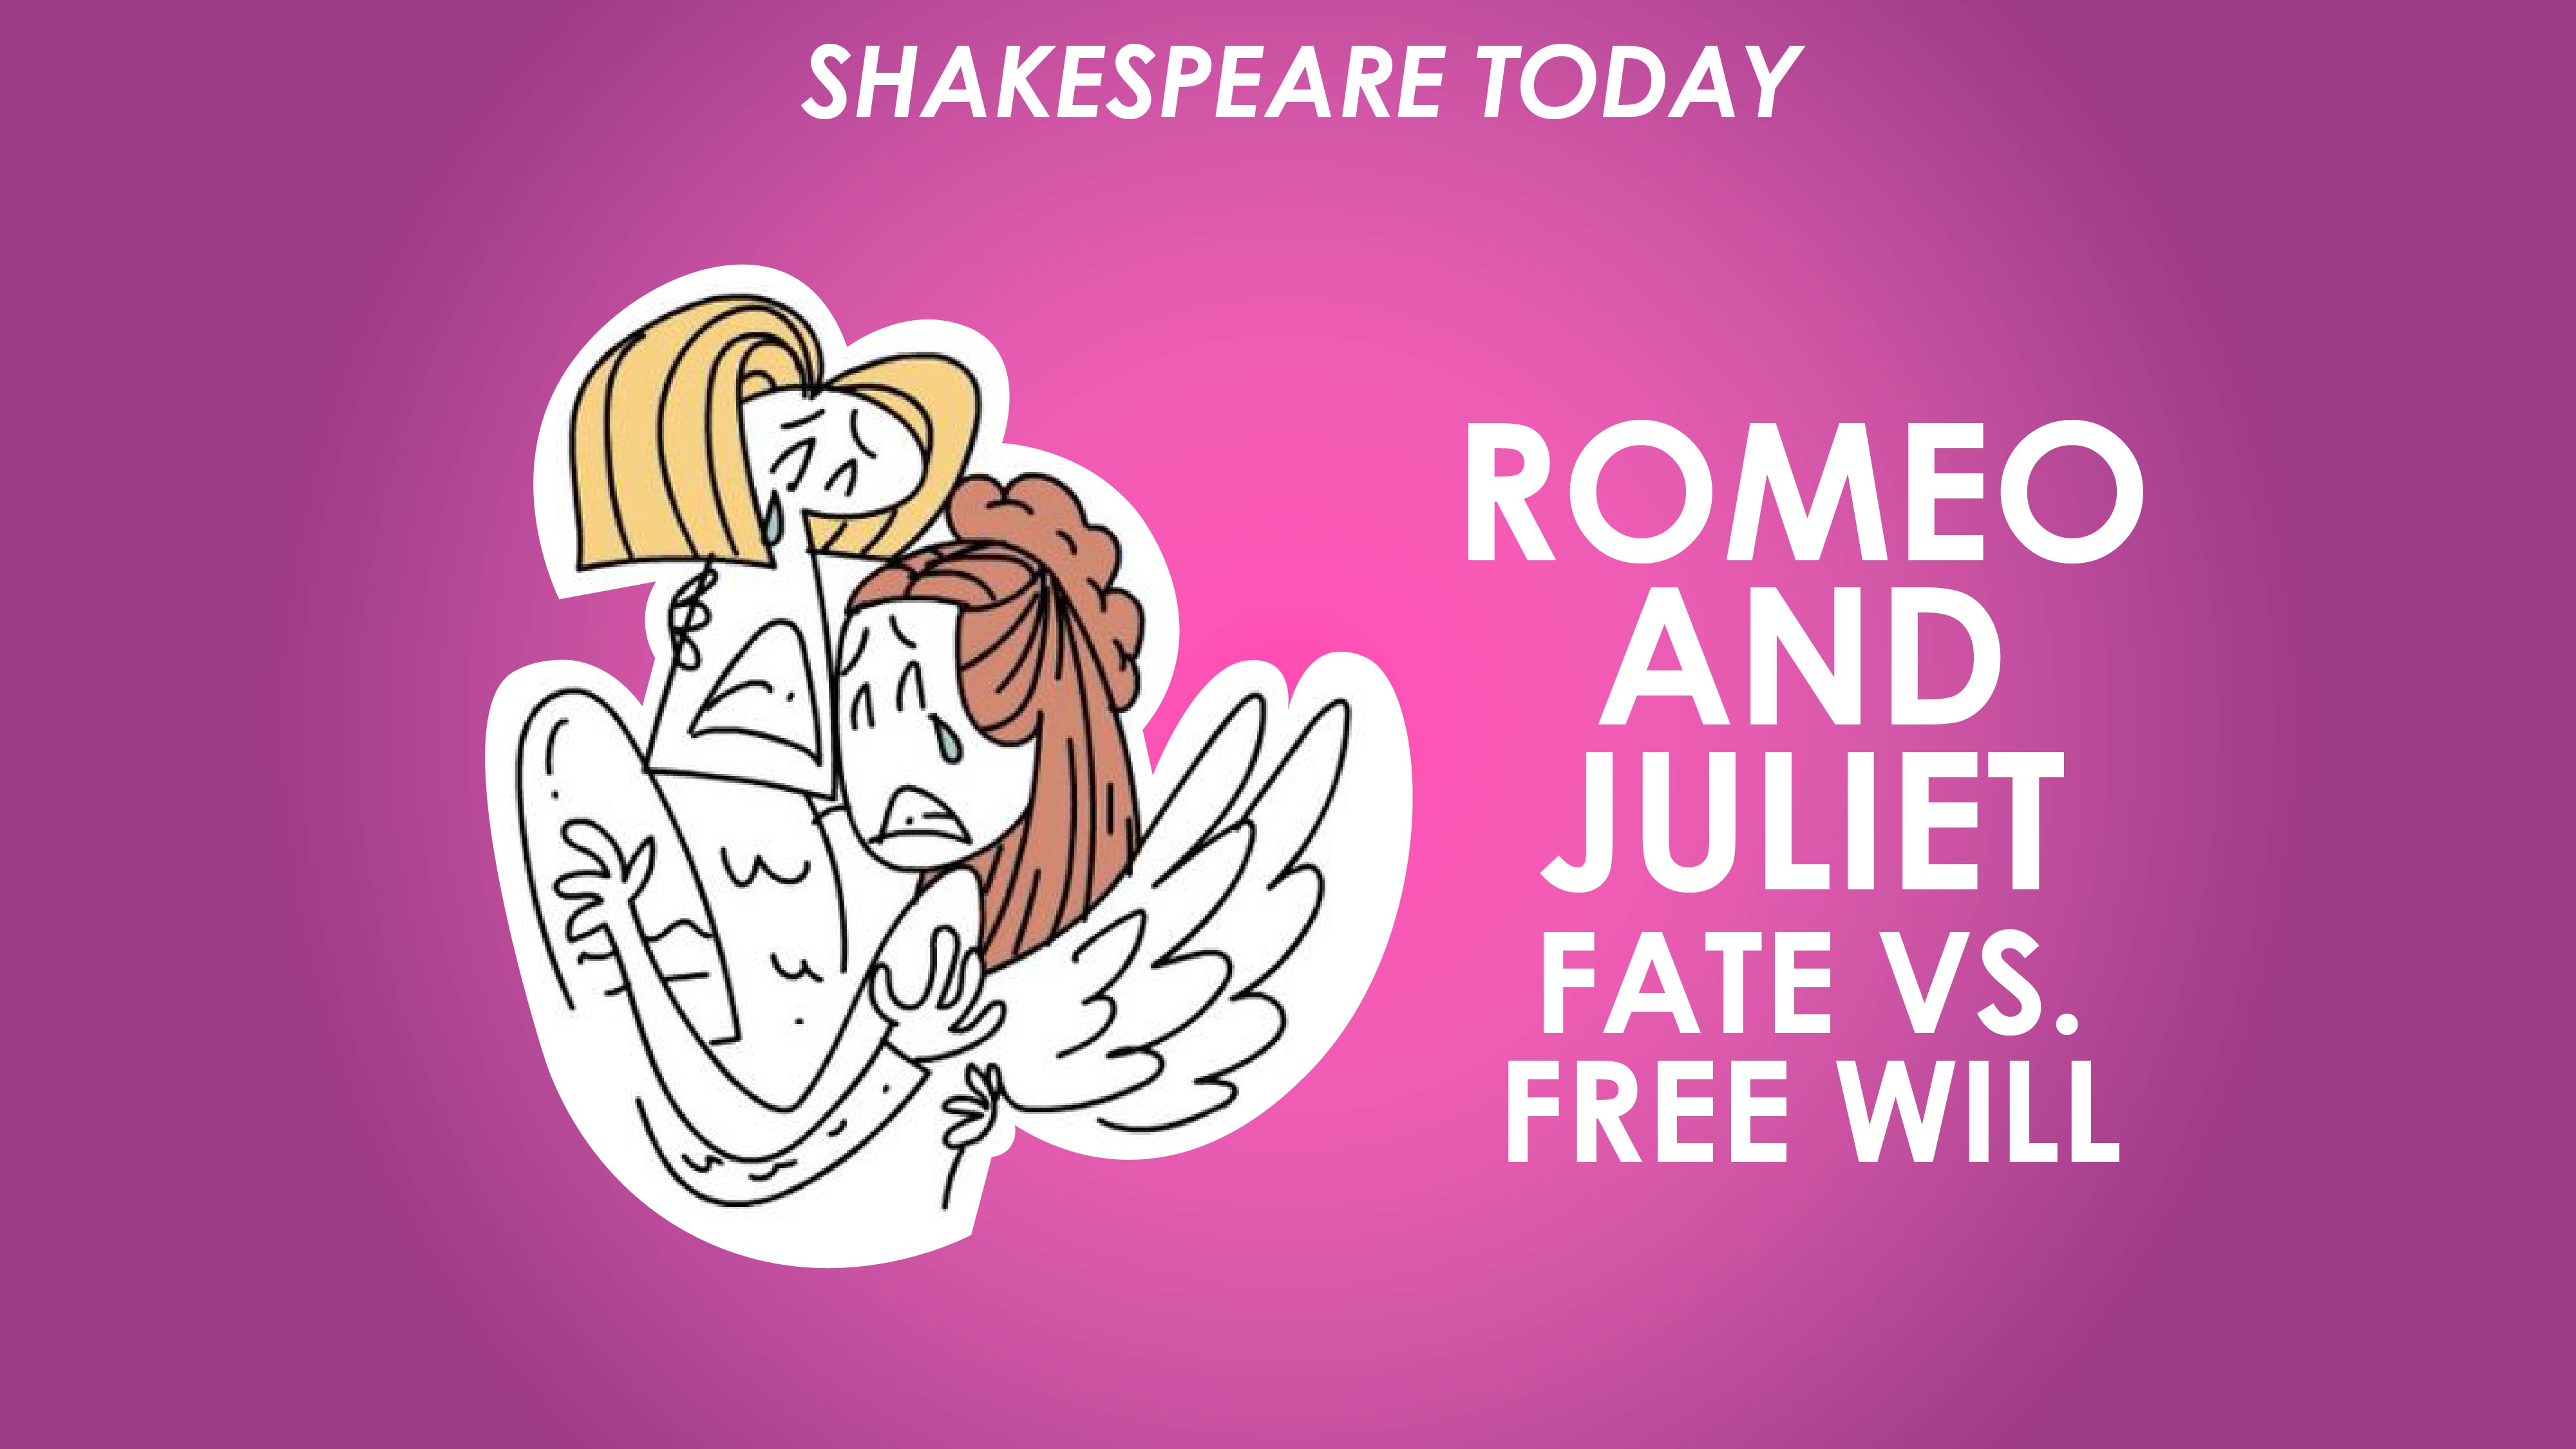 Romeo and Juliet Theme of Fate vs Free Will - Shakespeare Today Series